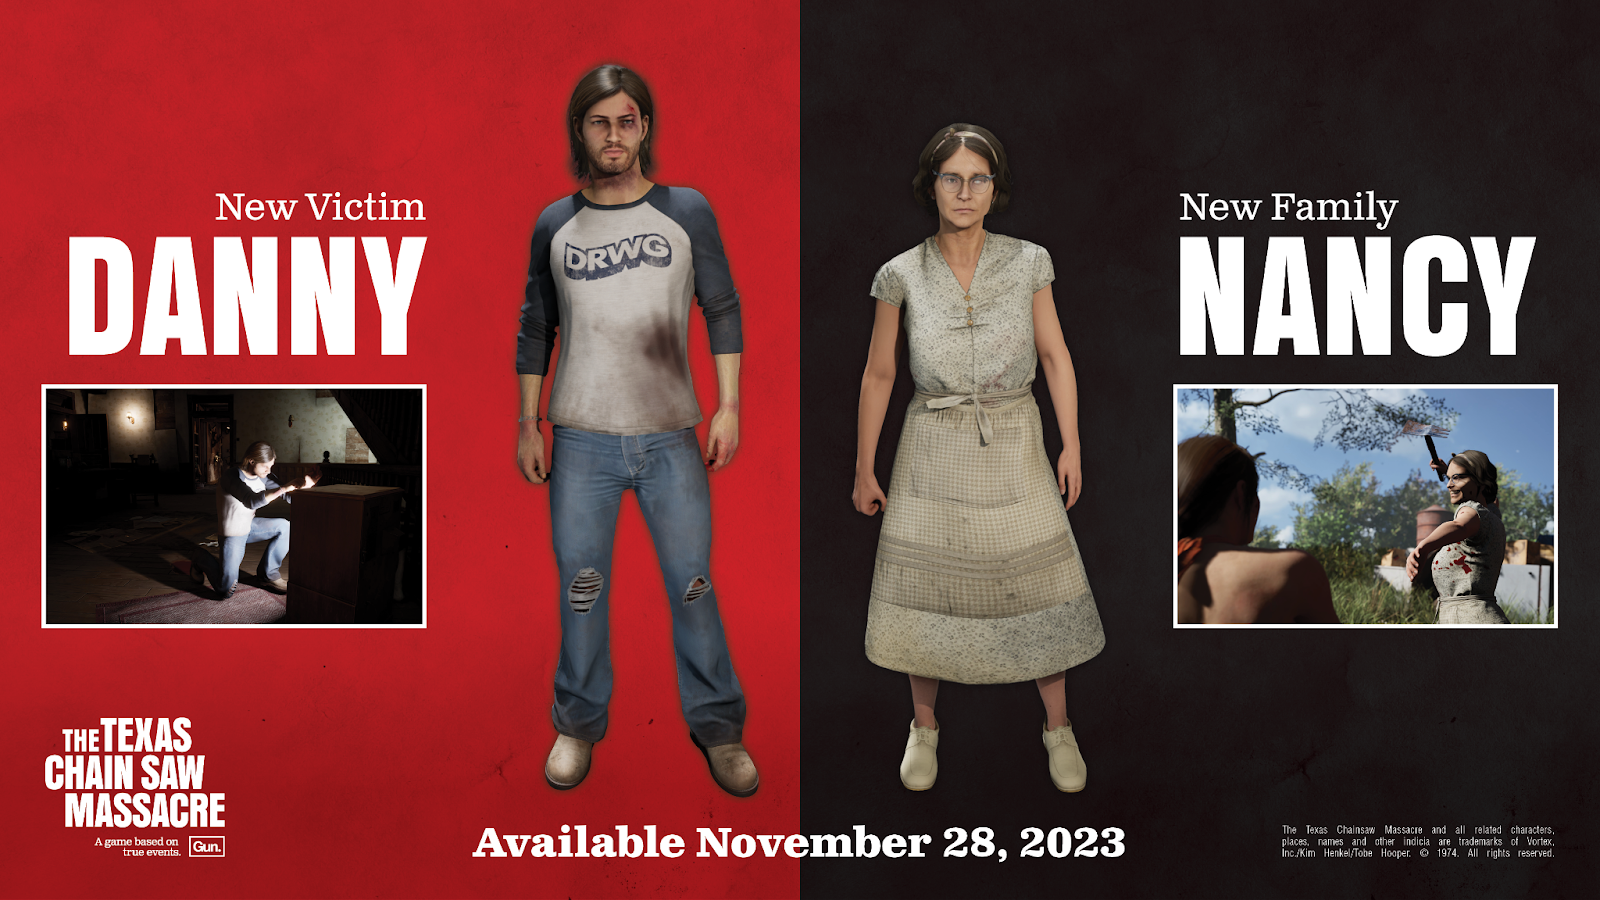 Introducing two new characters for The Texas Chain Saw Massacre. Victim Danny and Family Member Nancy!